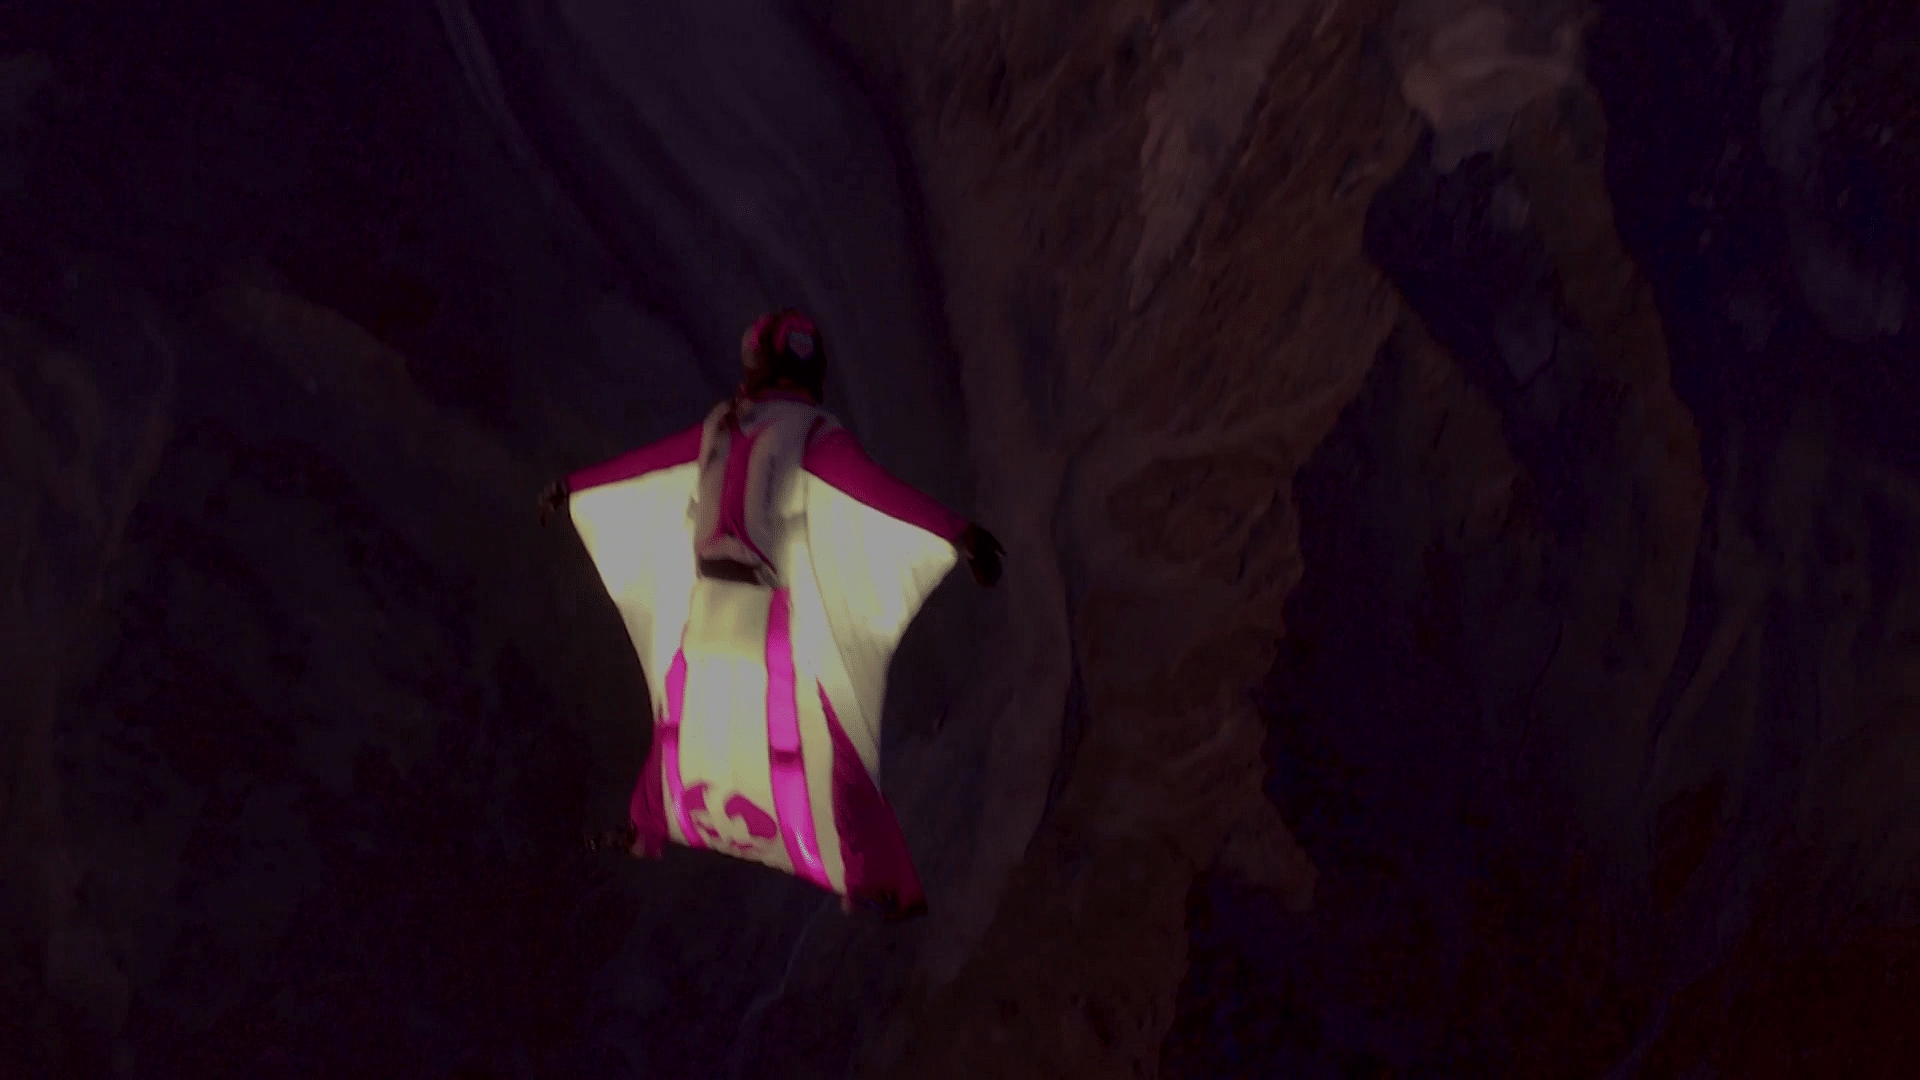 Geraldine Fasnacht paragliding wearing a lit up suit from 18000 feet